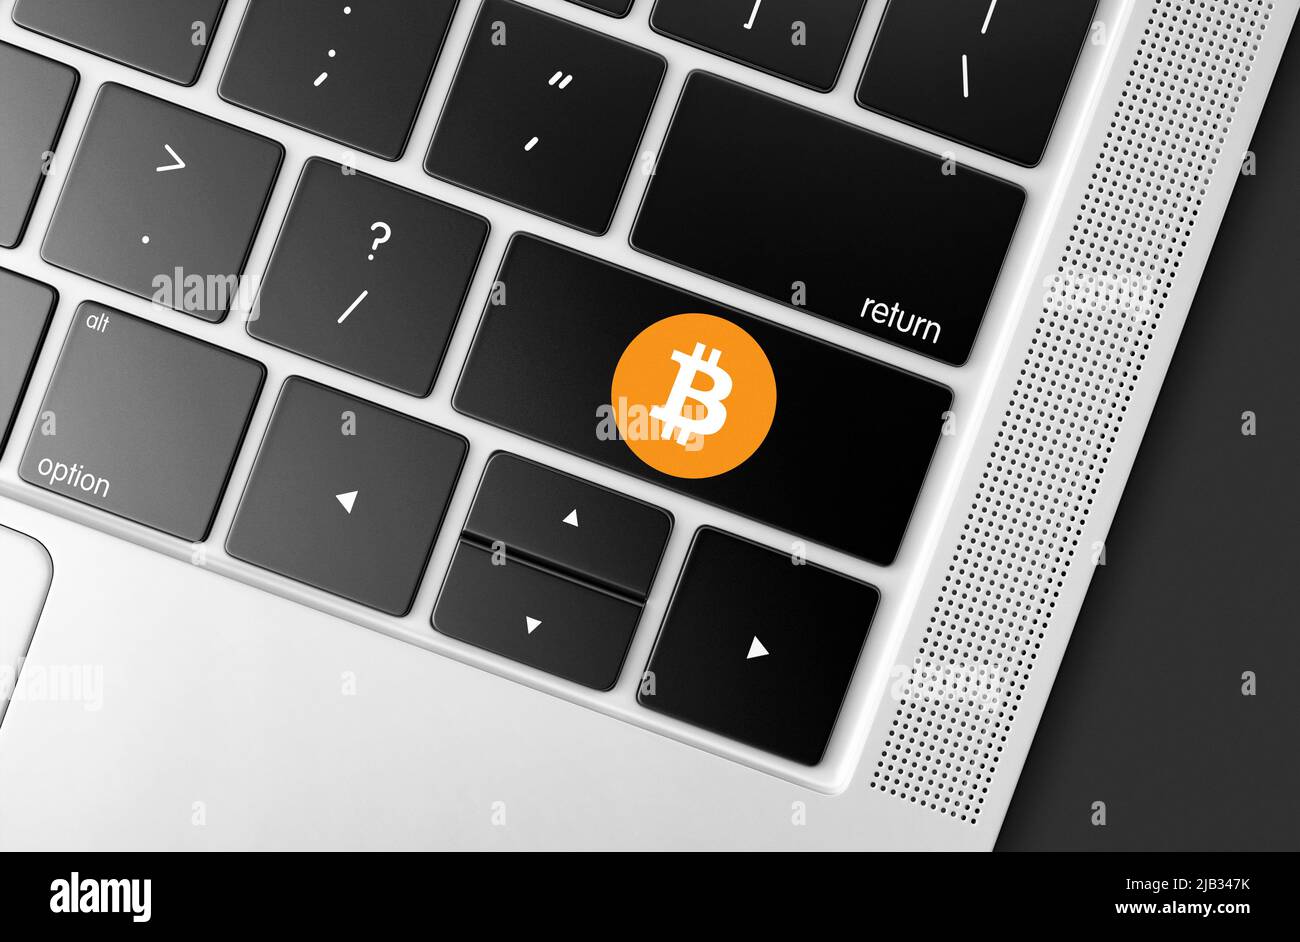 Dedicated Bitcoin cryptocurrency key on computer keyboard, concept picture of moden investment and global blockchain technology Stock Photo